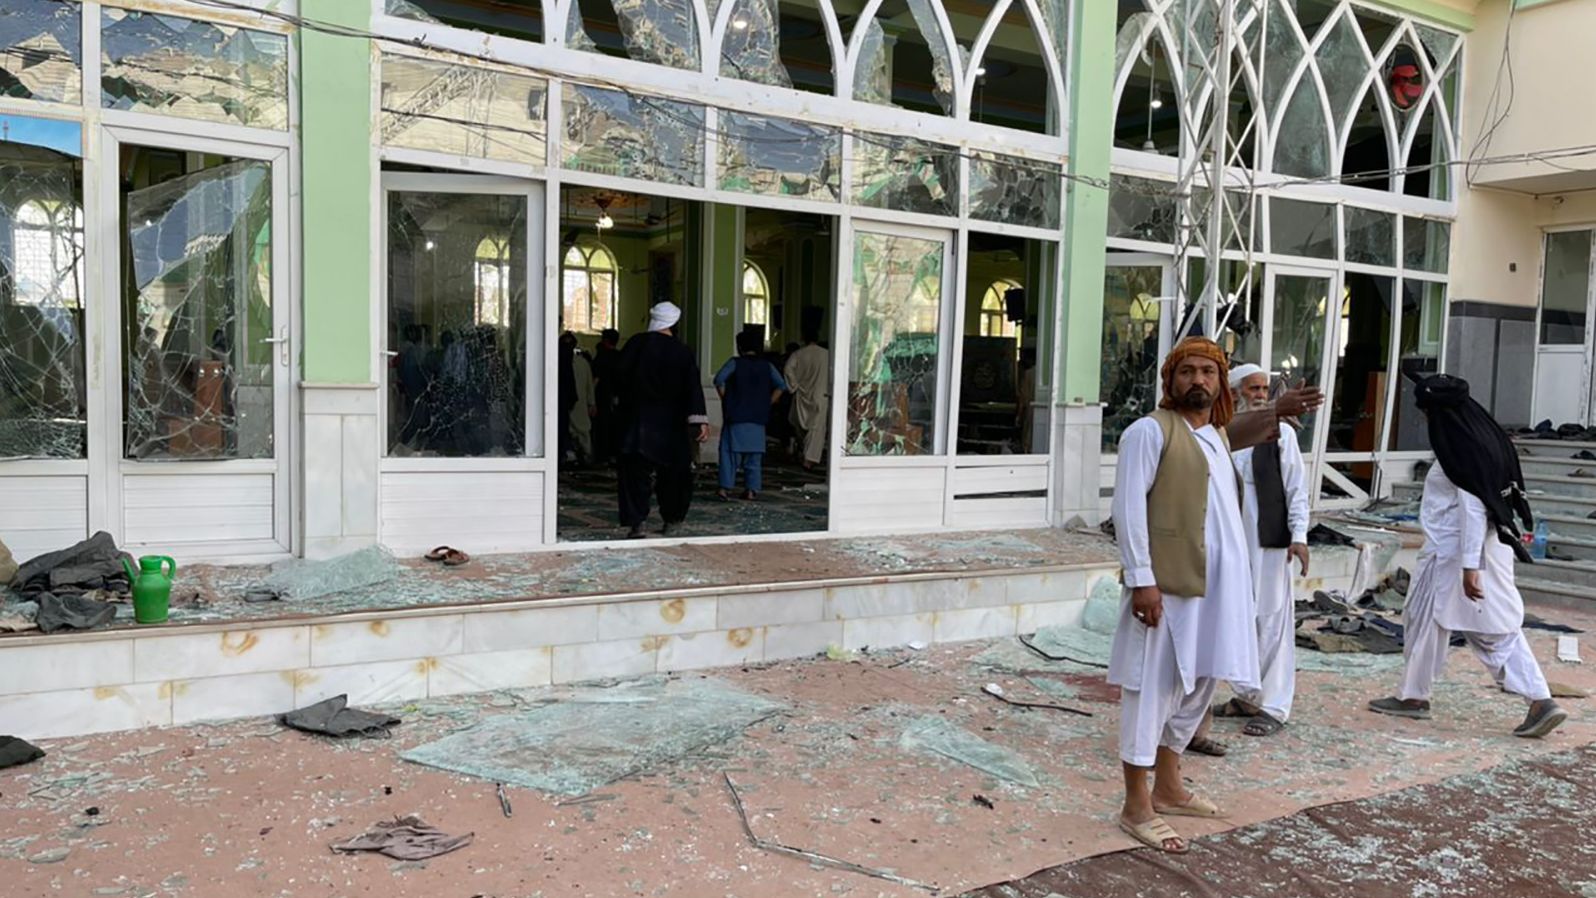 The blast hit a Shia community mosque in Afghanistan's southern Kandahar province on October 15.